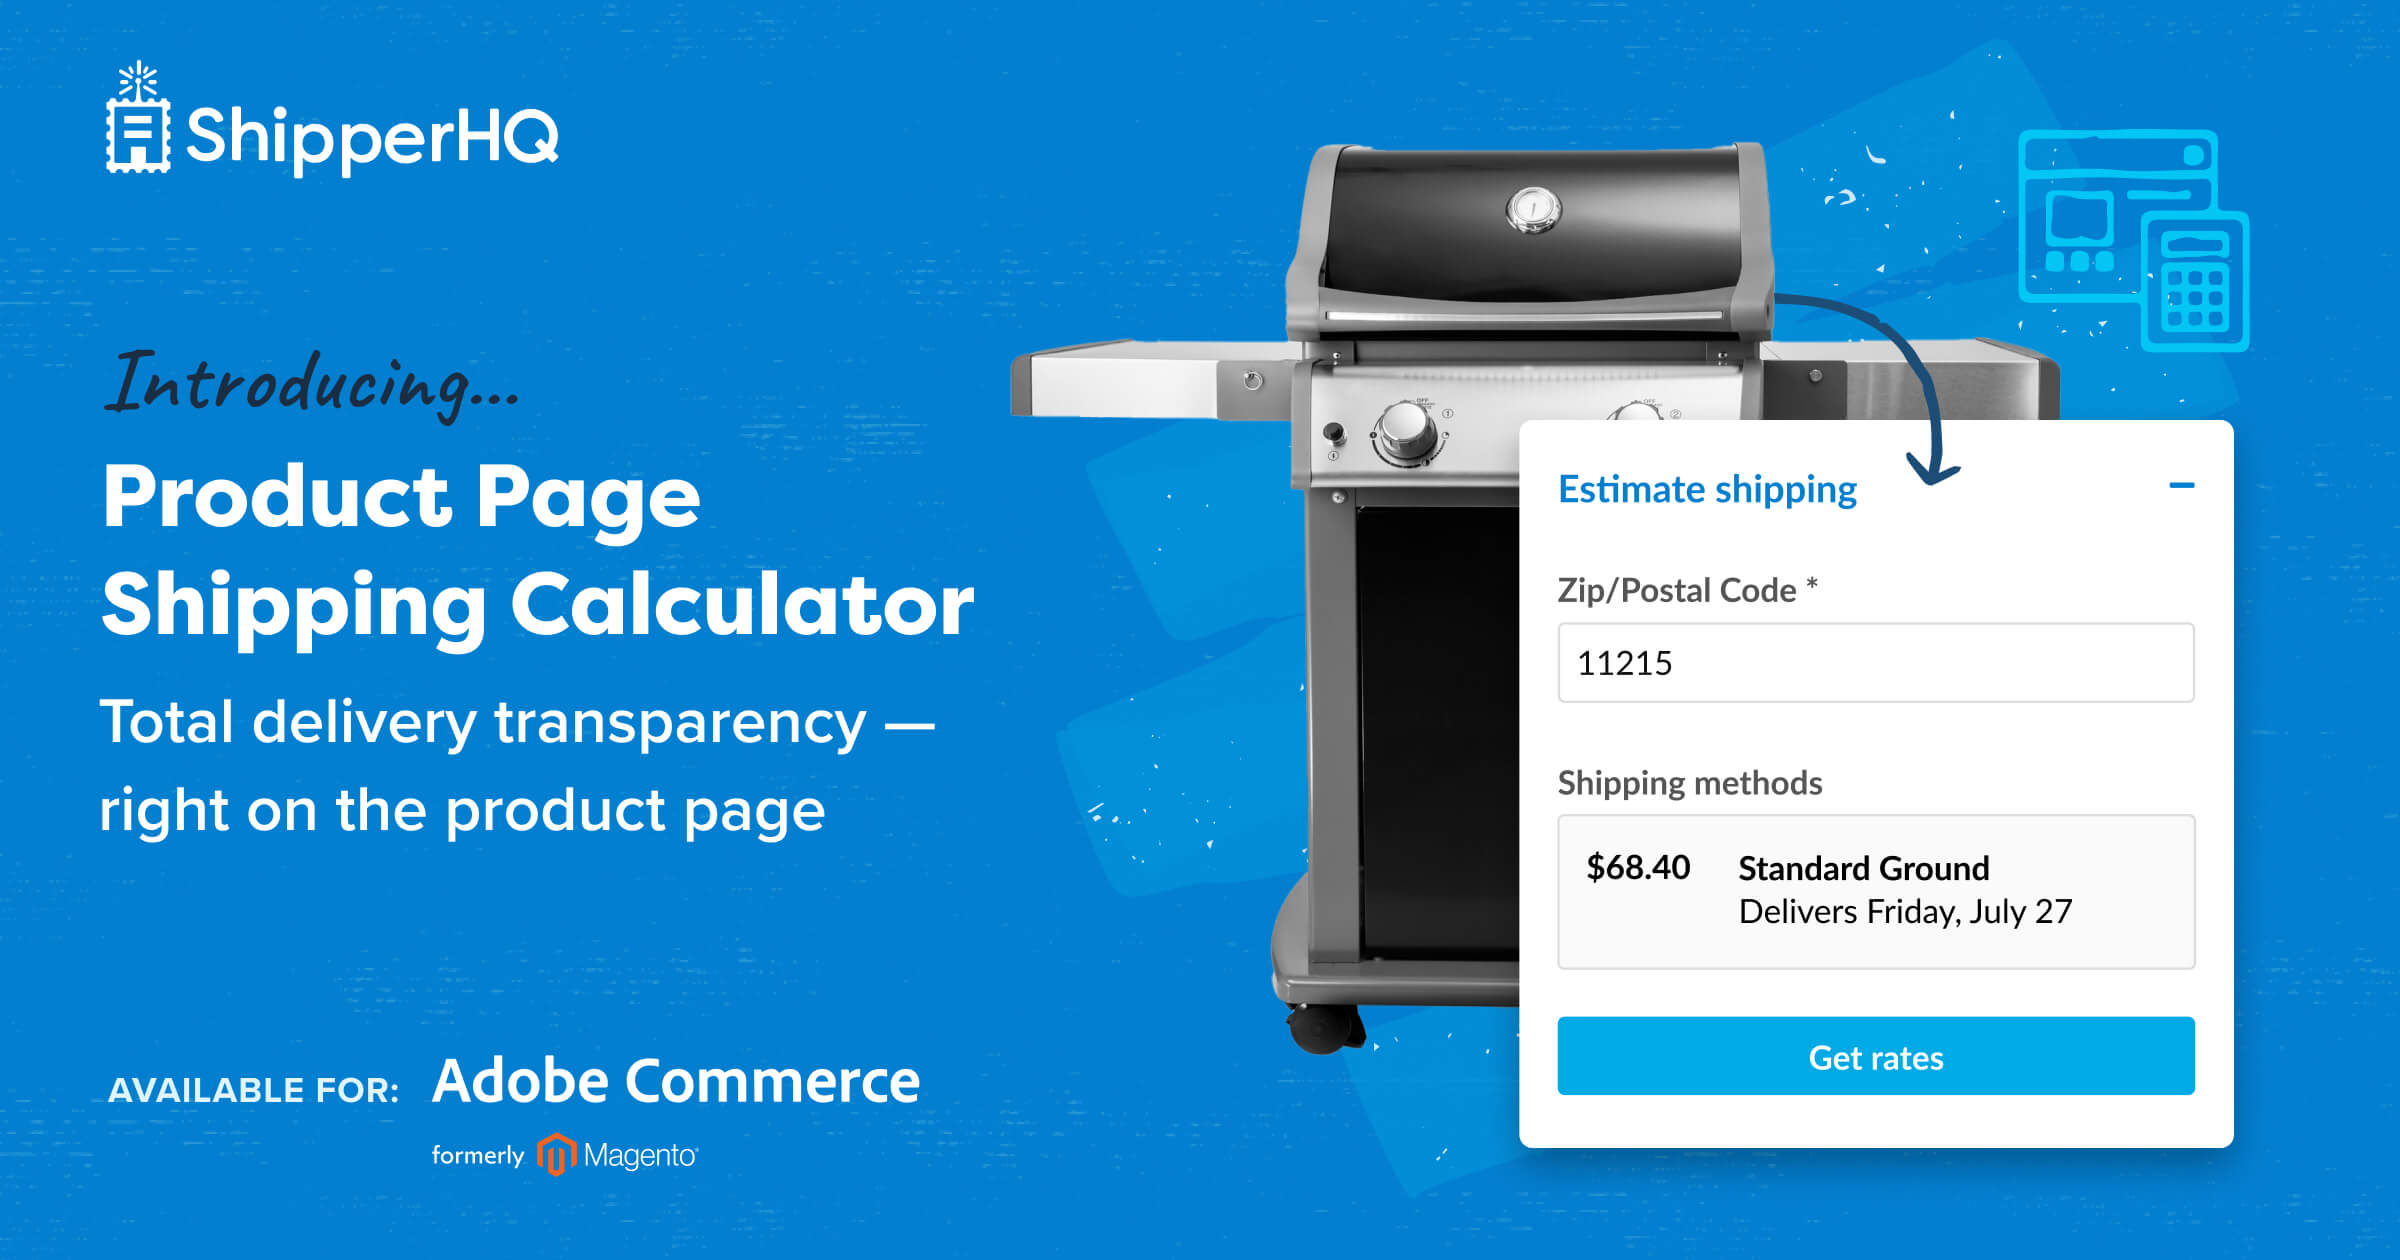 ShipperHQ's product page shipping calculator